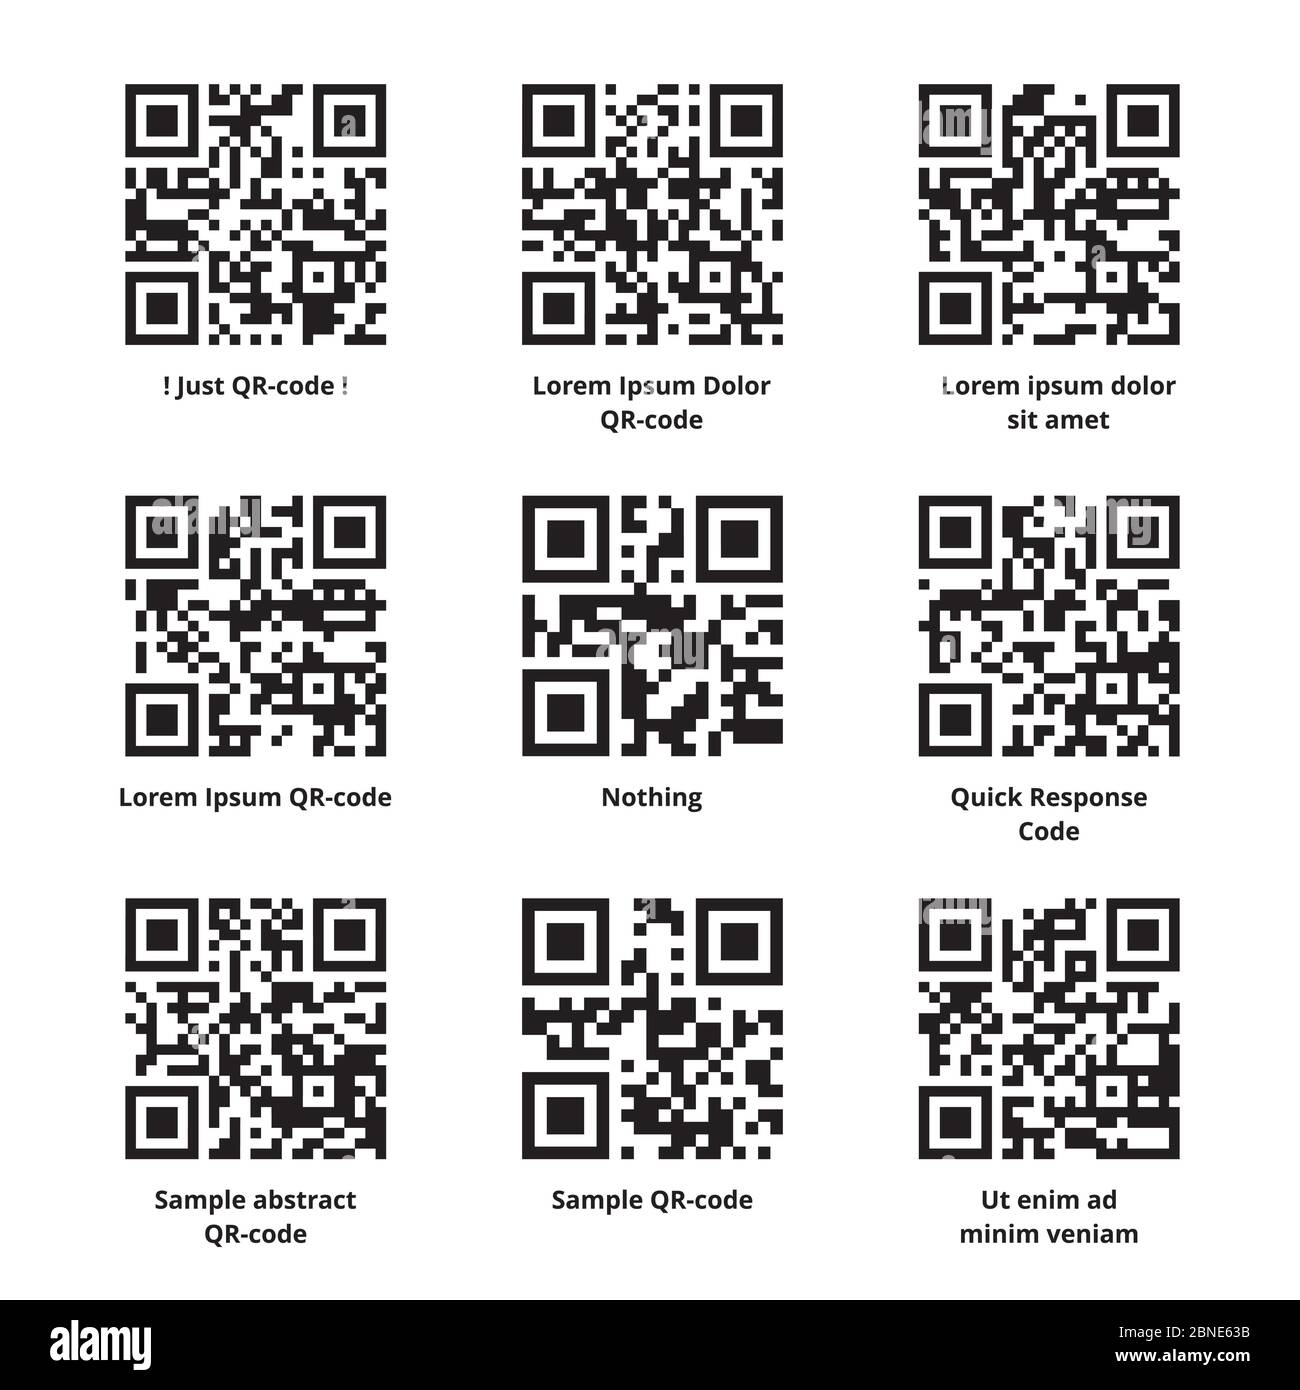 Sample Lorem Ipsum QR code set. Quick response codes with meaningless filler texts encoded in it. Ready to scan. Vector eps8 illustration. Stock Vector